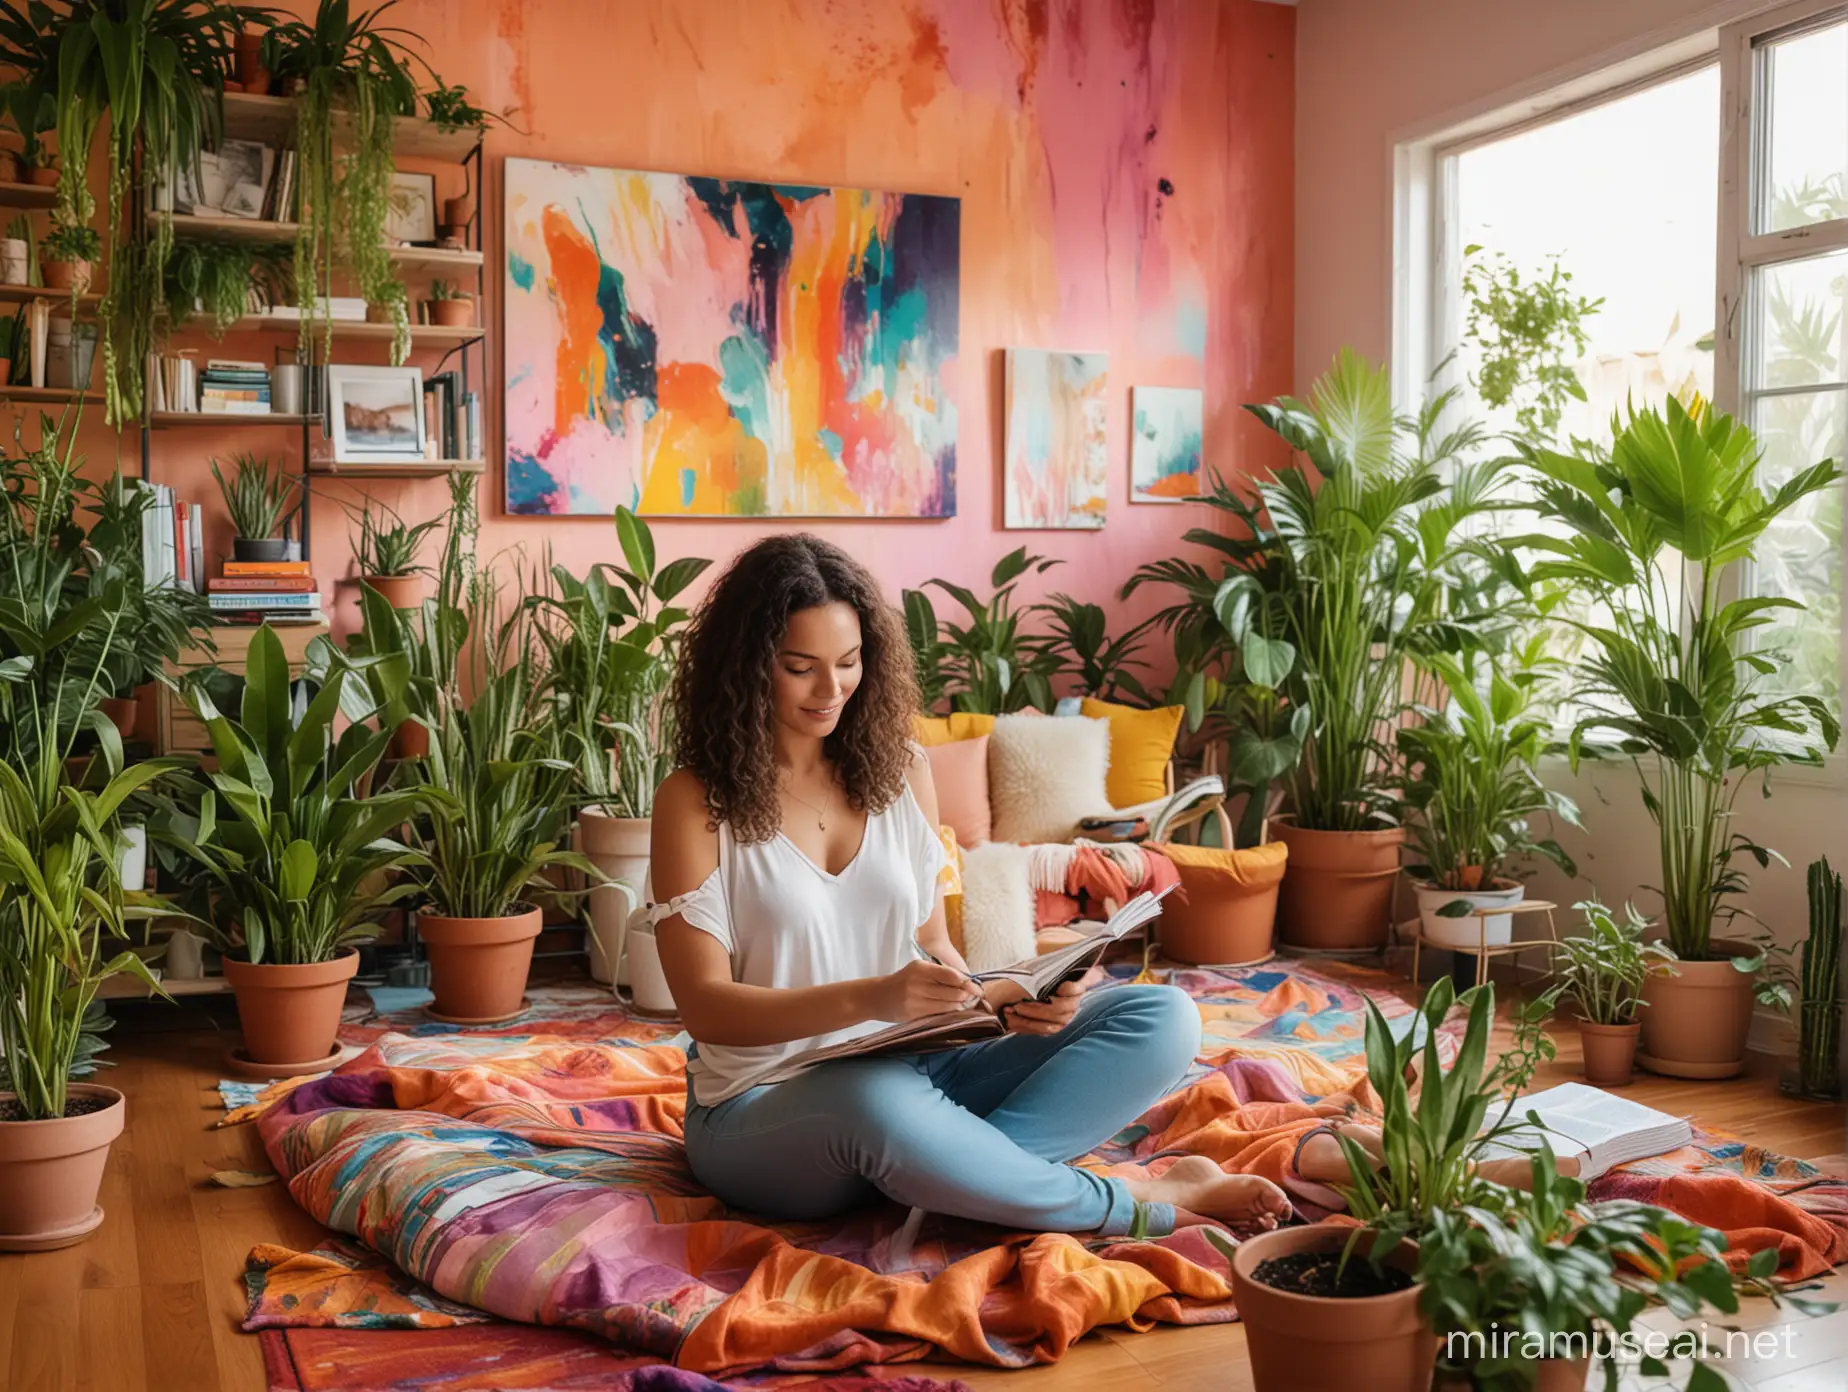 colorful, vibrant, abstract background, woman, self-awareness, journaling in living room with plants